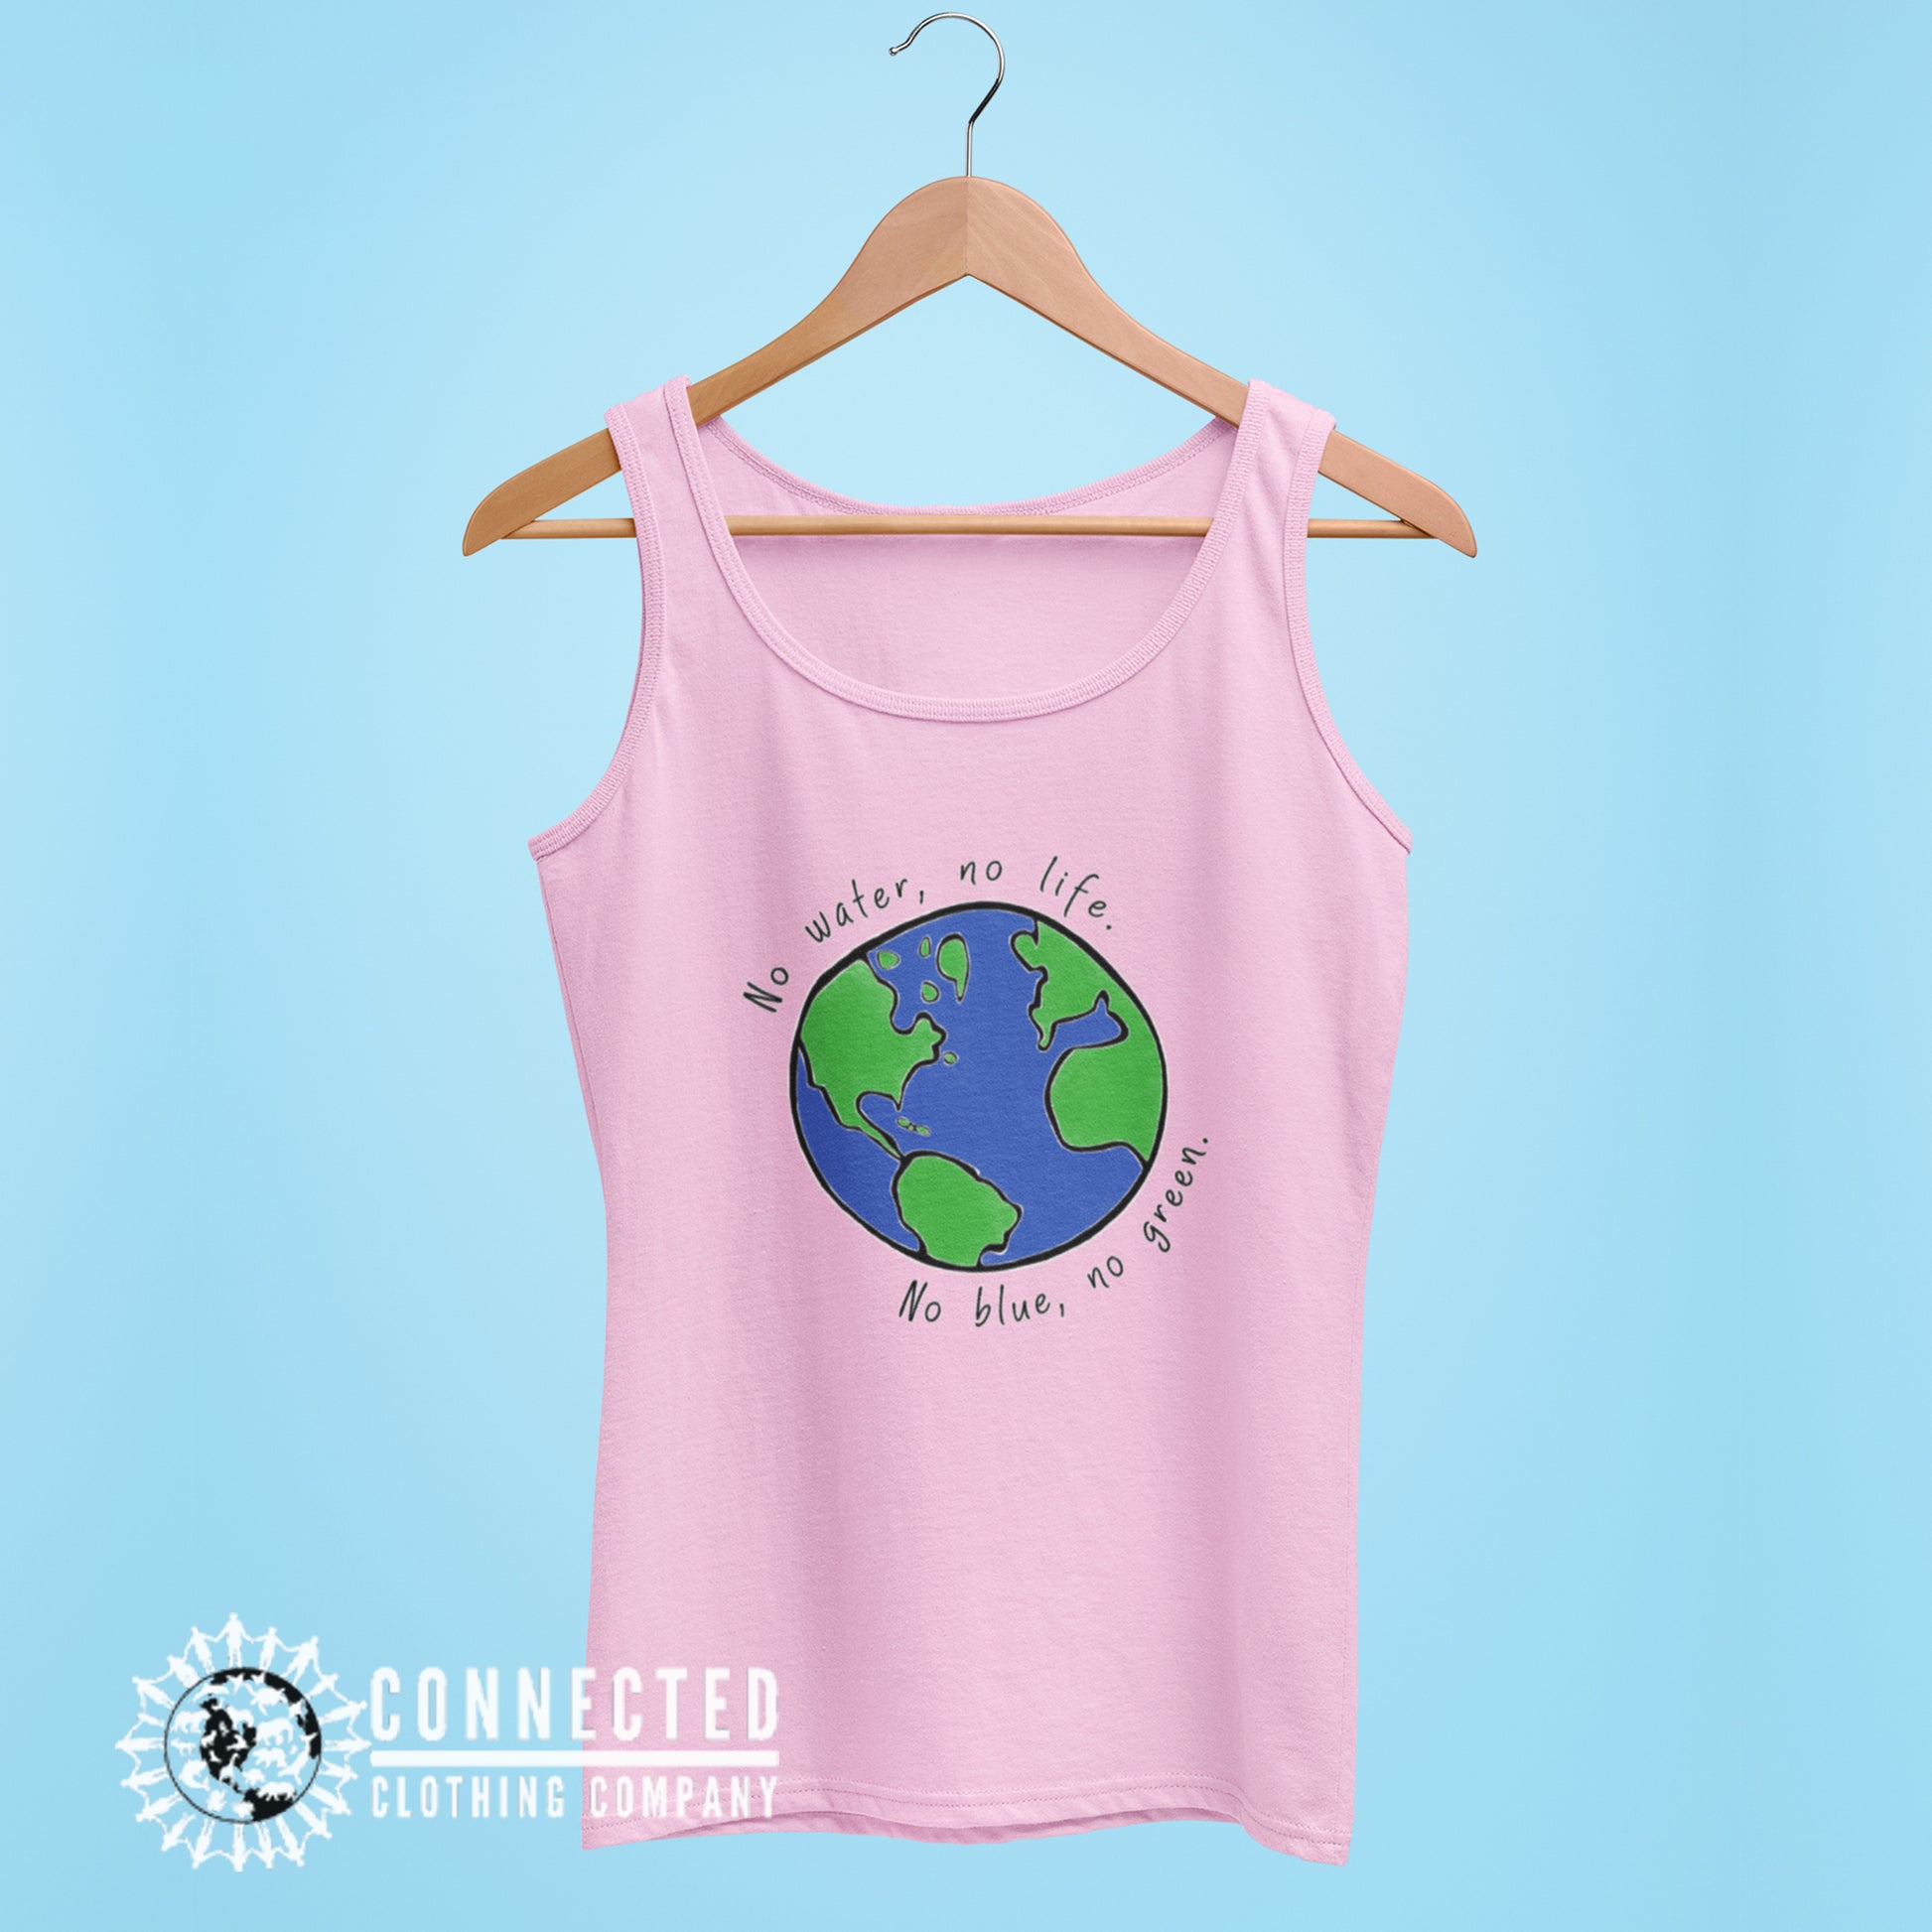 Pink No Blue No Green Women's Relaxed Tank - Connected Clothing Company - Ethically and Sustainably Made - 10% of profits donated to Mission Blue ocean conservation